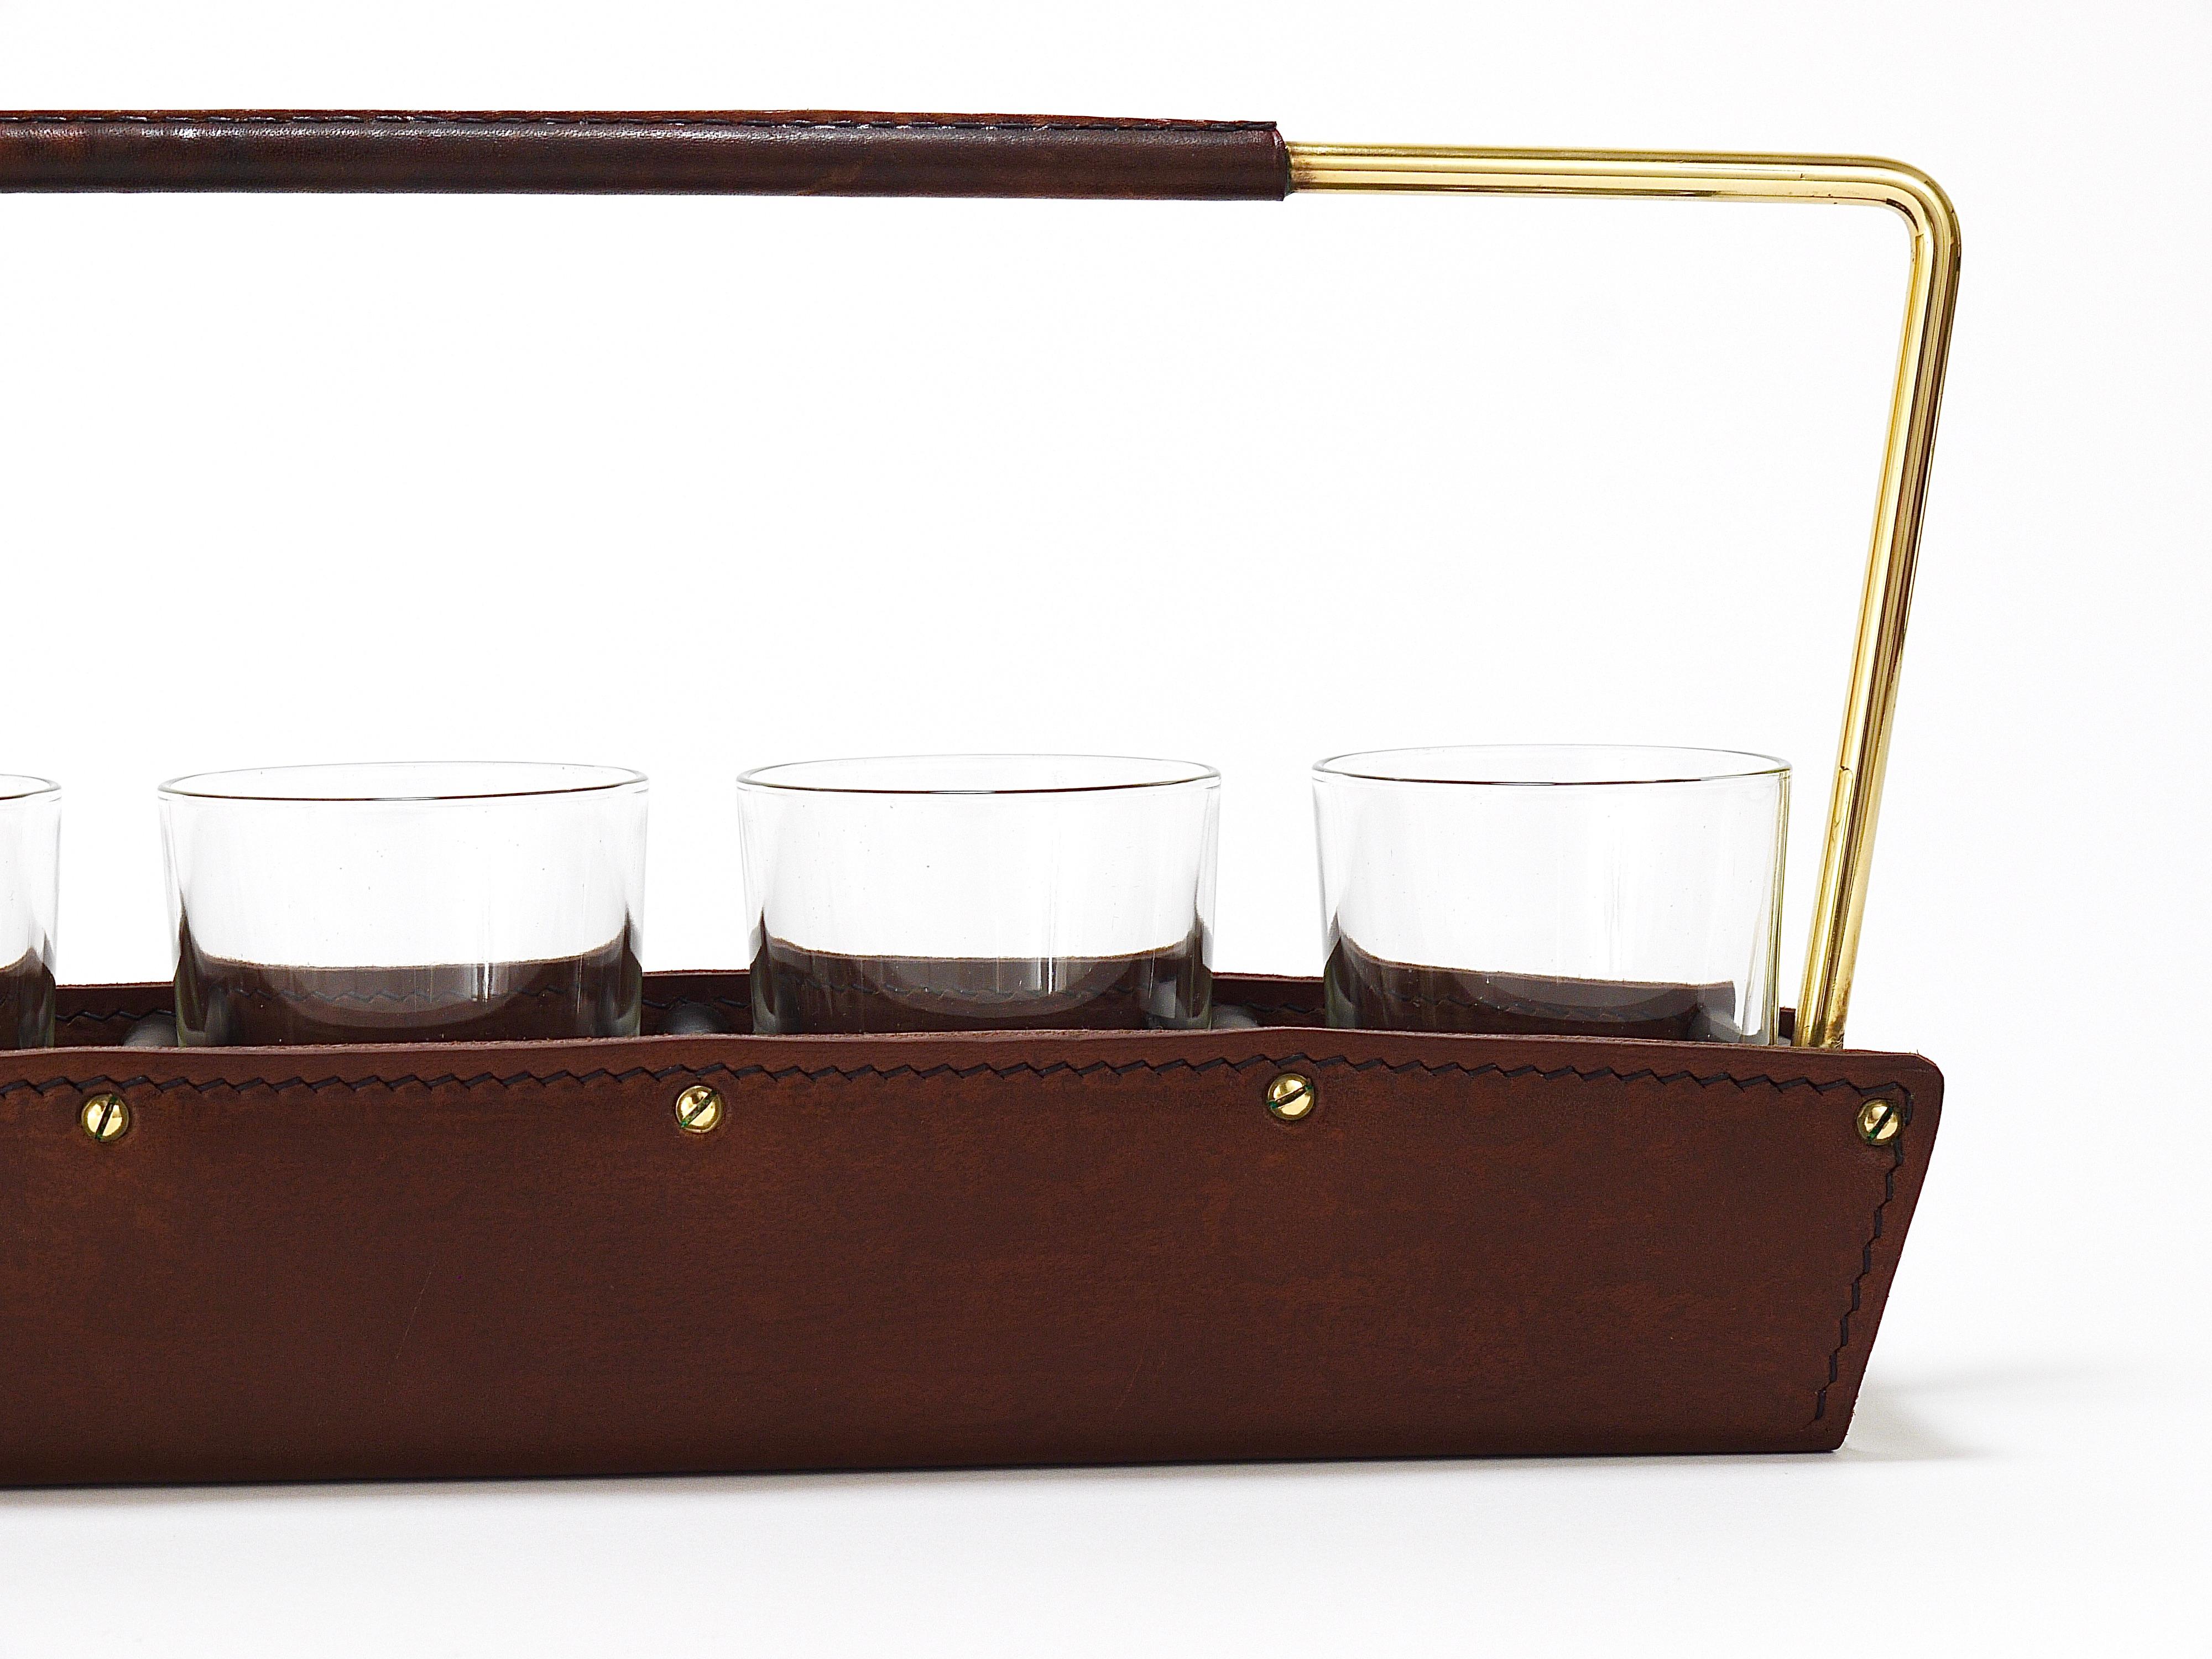 A minimalistic and beautiful midcentury modern long tray drinks carrier / drinking glass caddy with 6 clear glasses from the 1950s. Designed and executed by Carl Aubock II in Vienna. Made of polished brass and thick brown tan leather. In very good